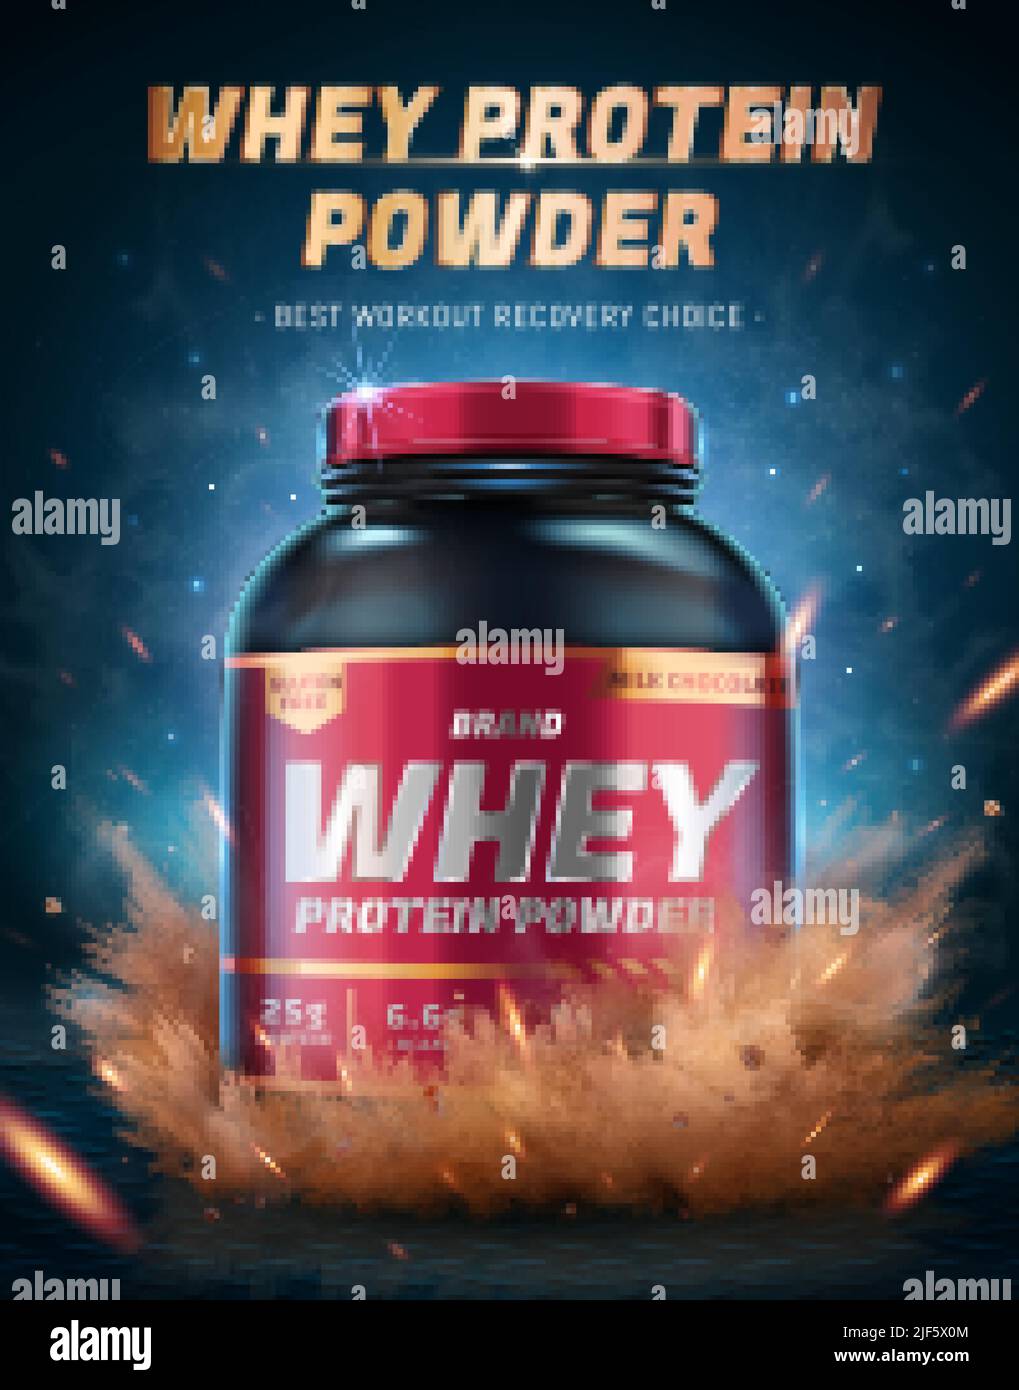 Whey protein powder ad poster. 3D Illustration of a whey protein jar with powder explosion effect. Bodybuilding food supplements product promo Stock Vector